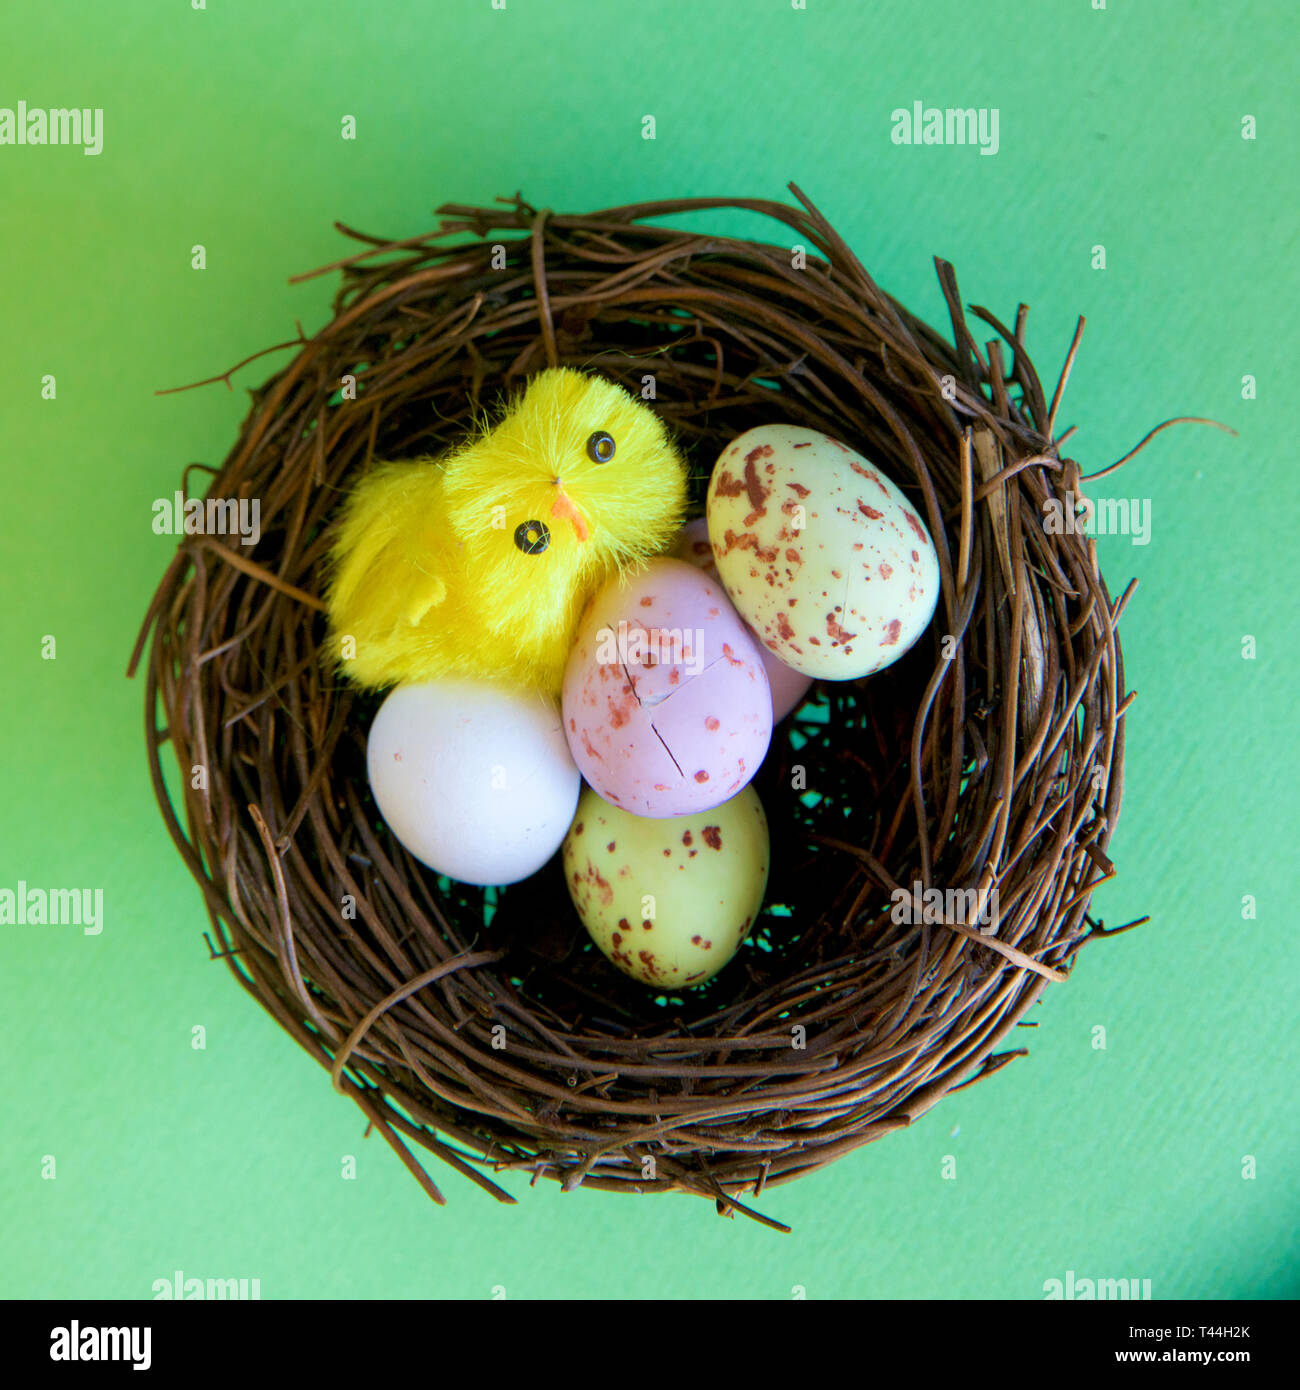 Speckled speckled Easter eggs in a brown nest signifying new life. Stock Photo